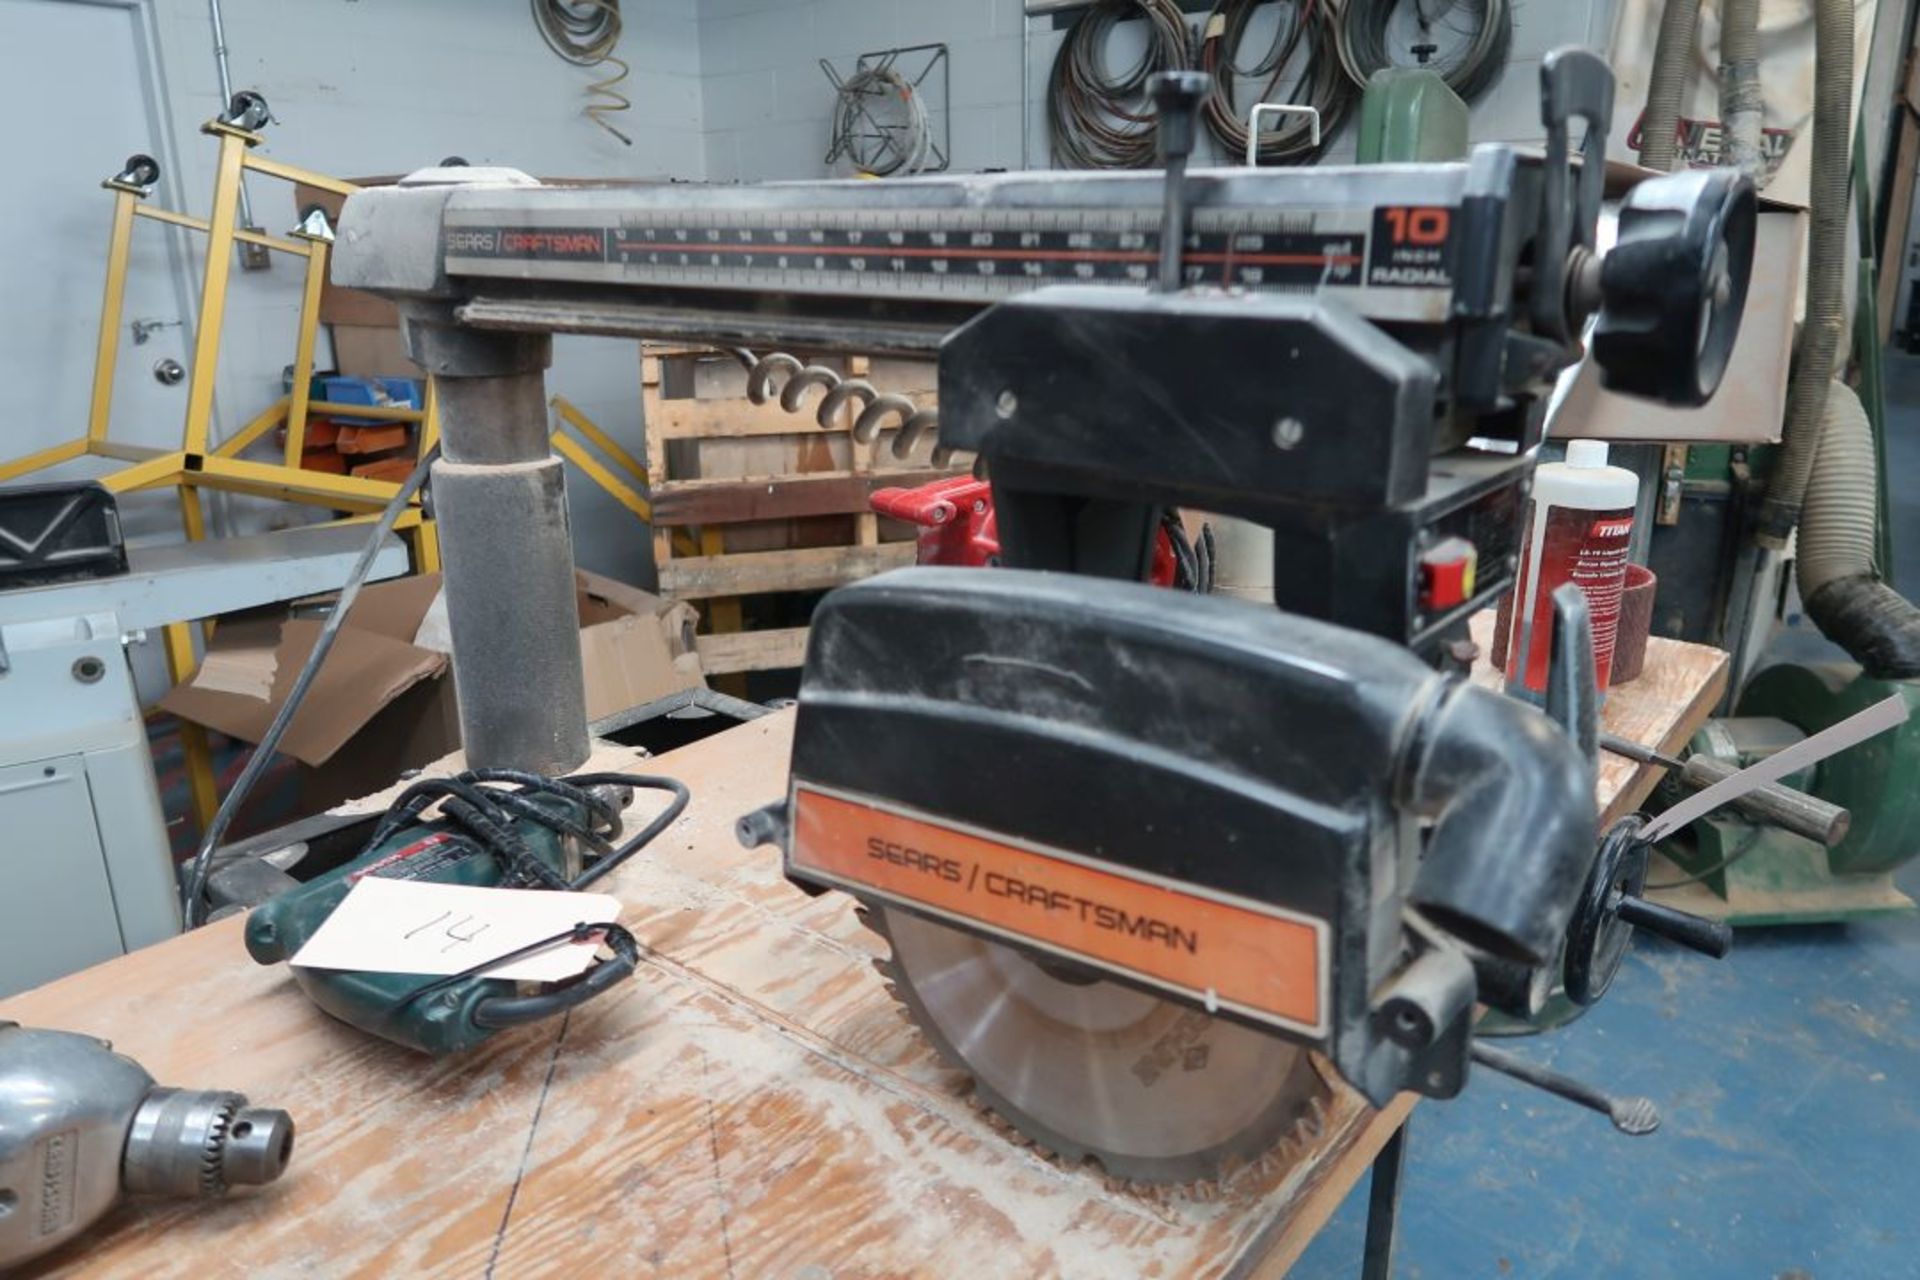 SEARS 10'' RADIAL SAW W/TABLE - Image 2 of 2